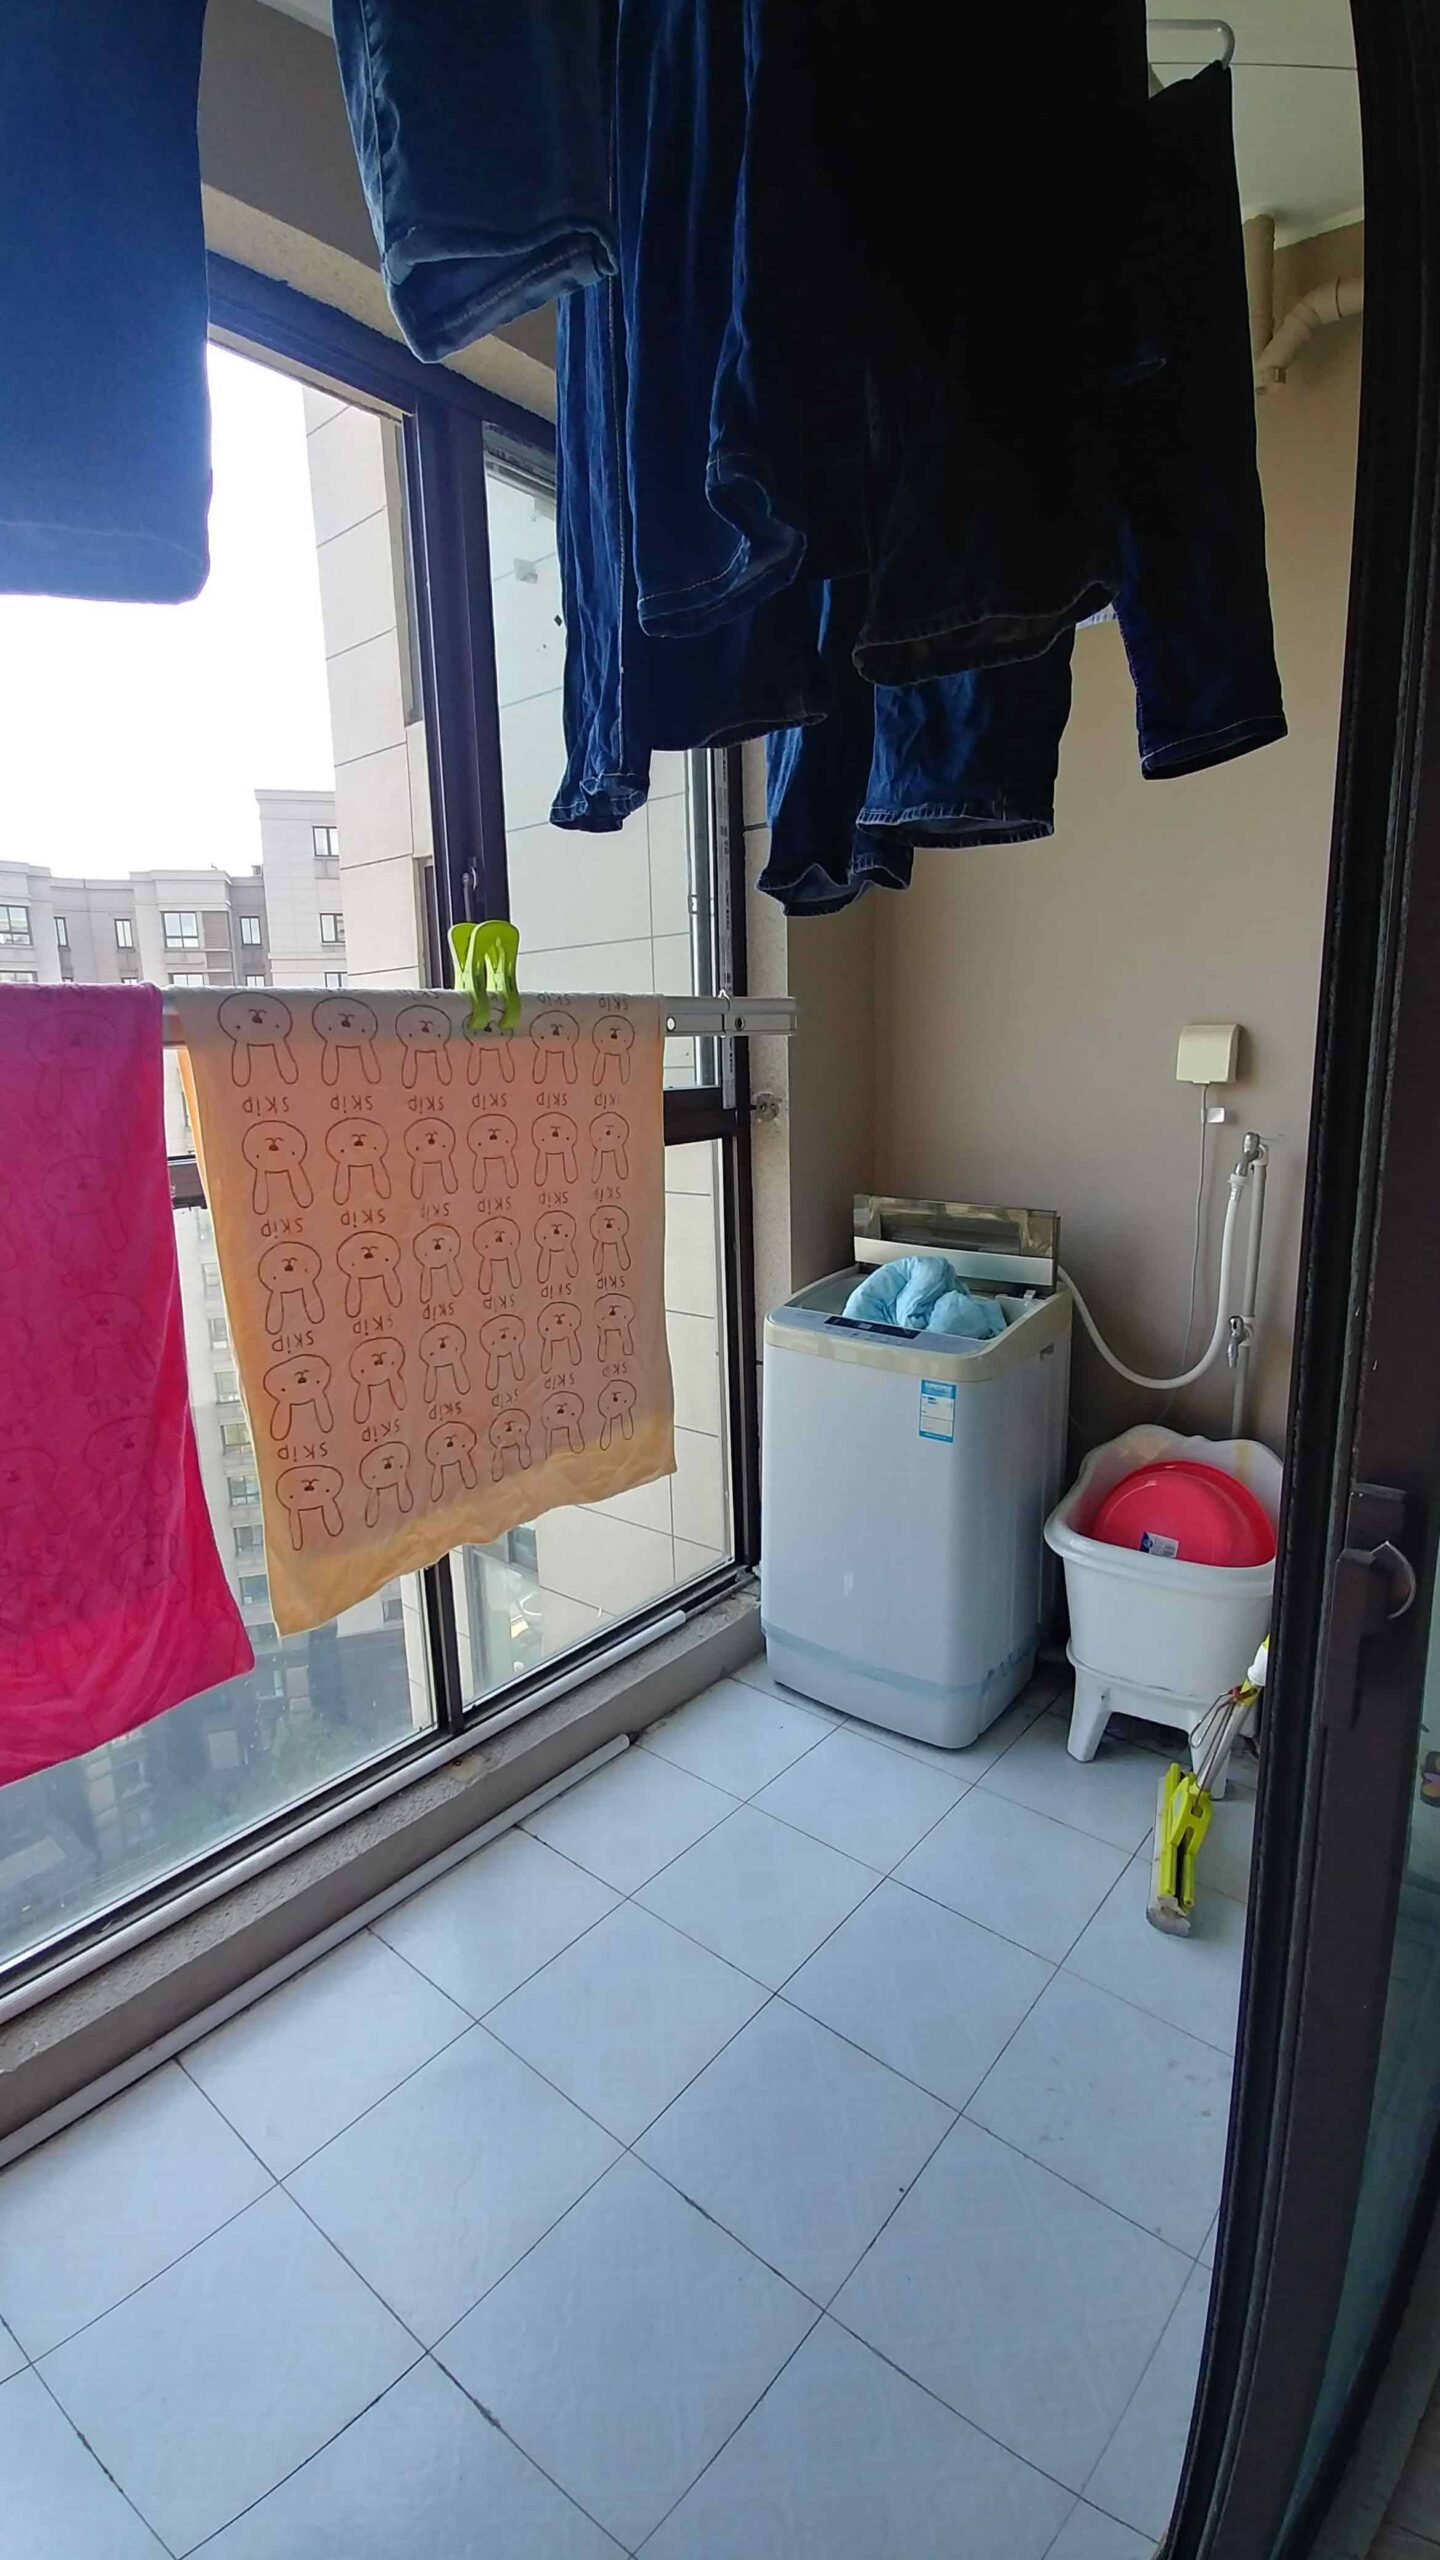 Laundry room in our Chinese apartment